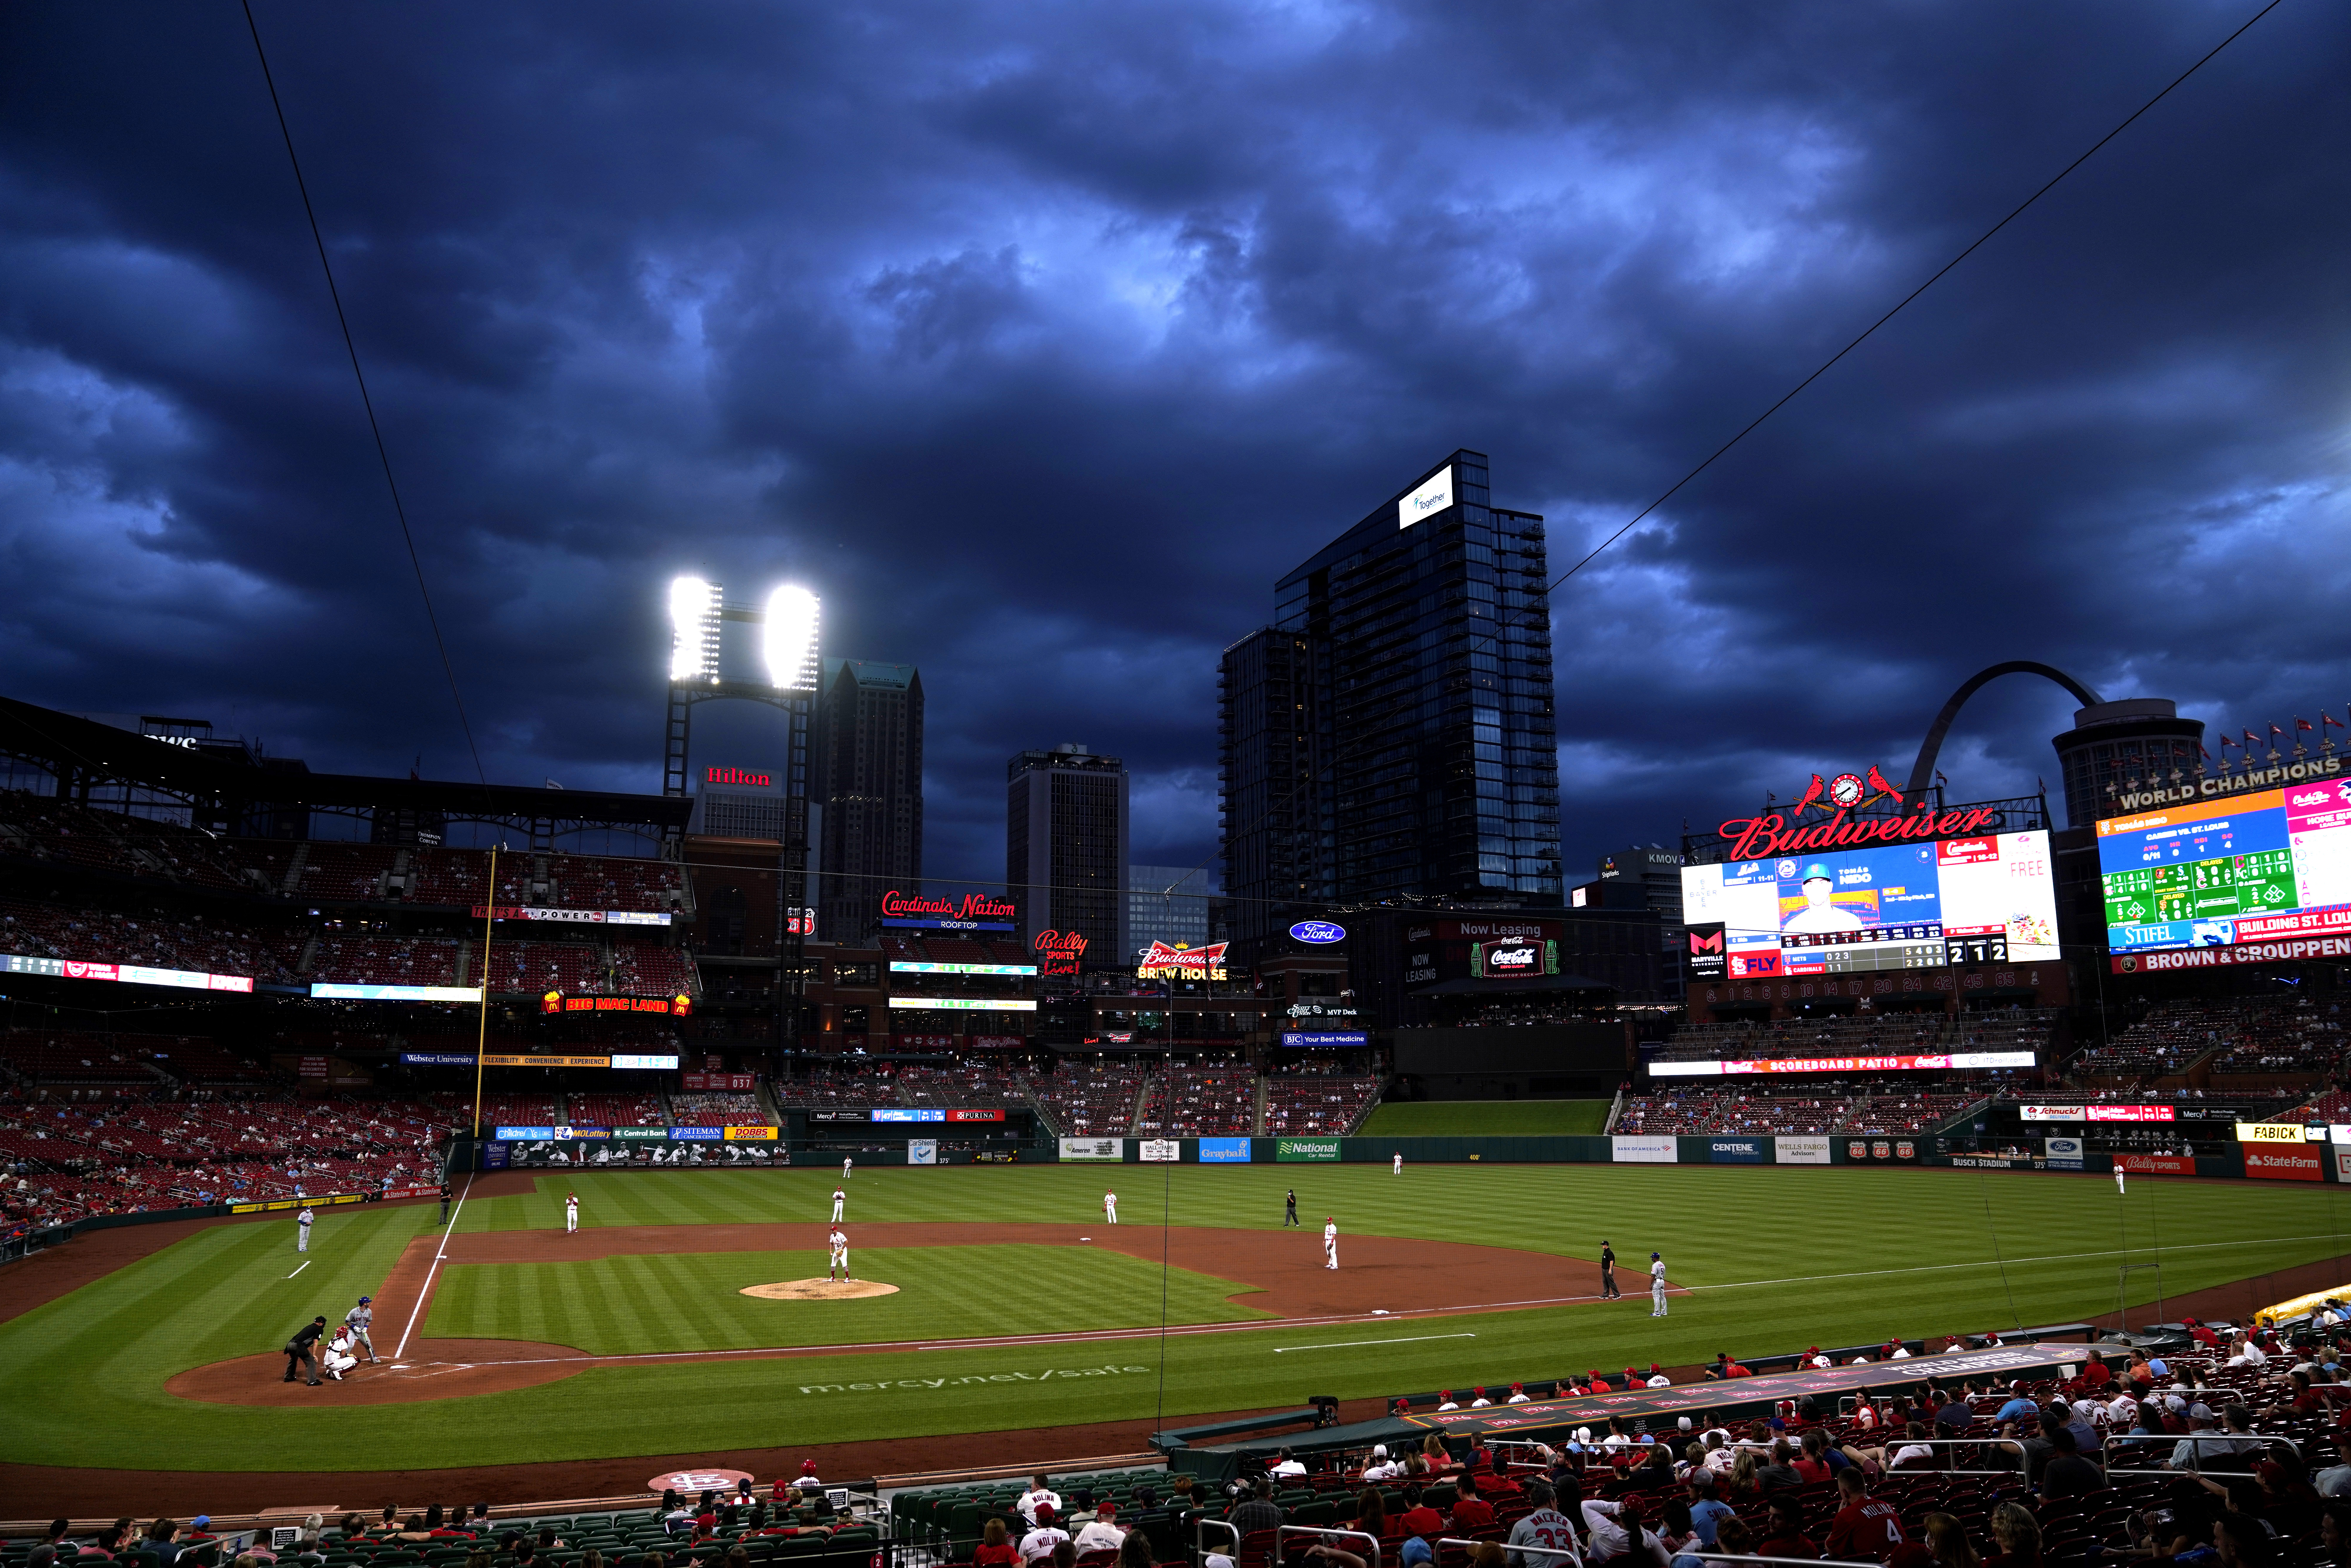 VIDEO: Fans, players left briefly in darkness during Cardinals